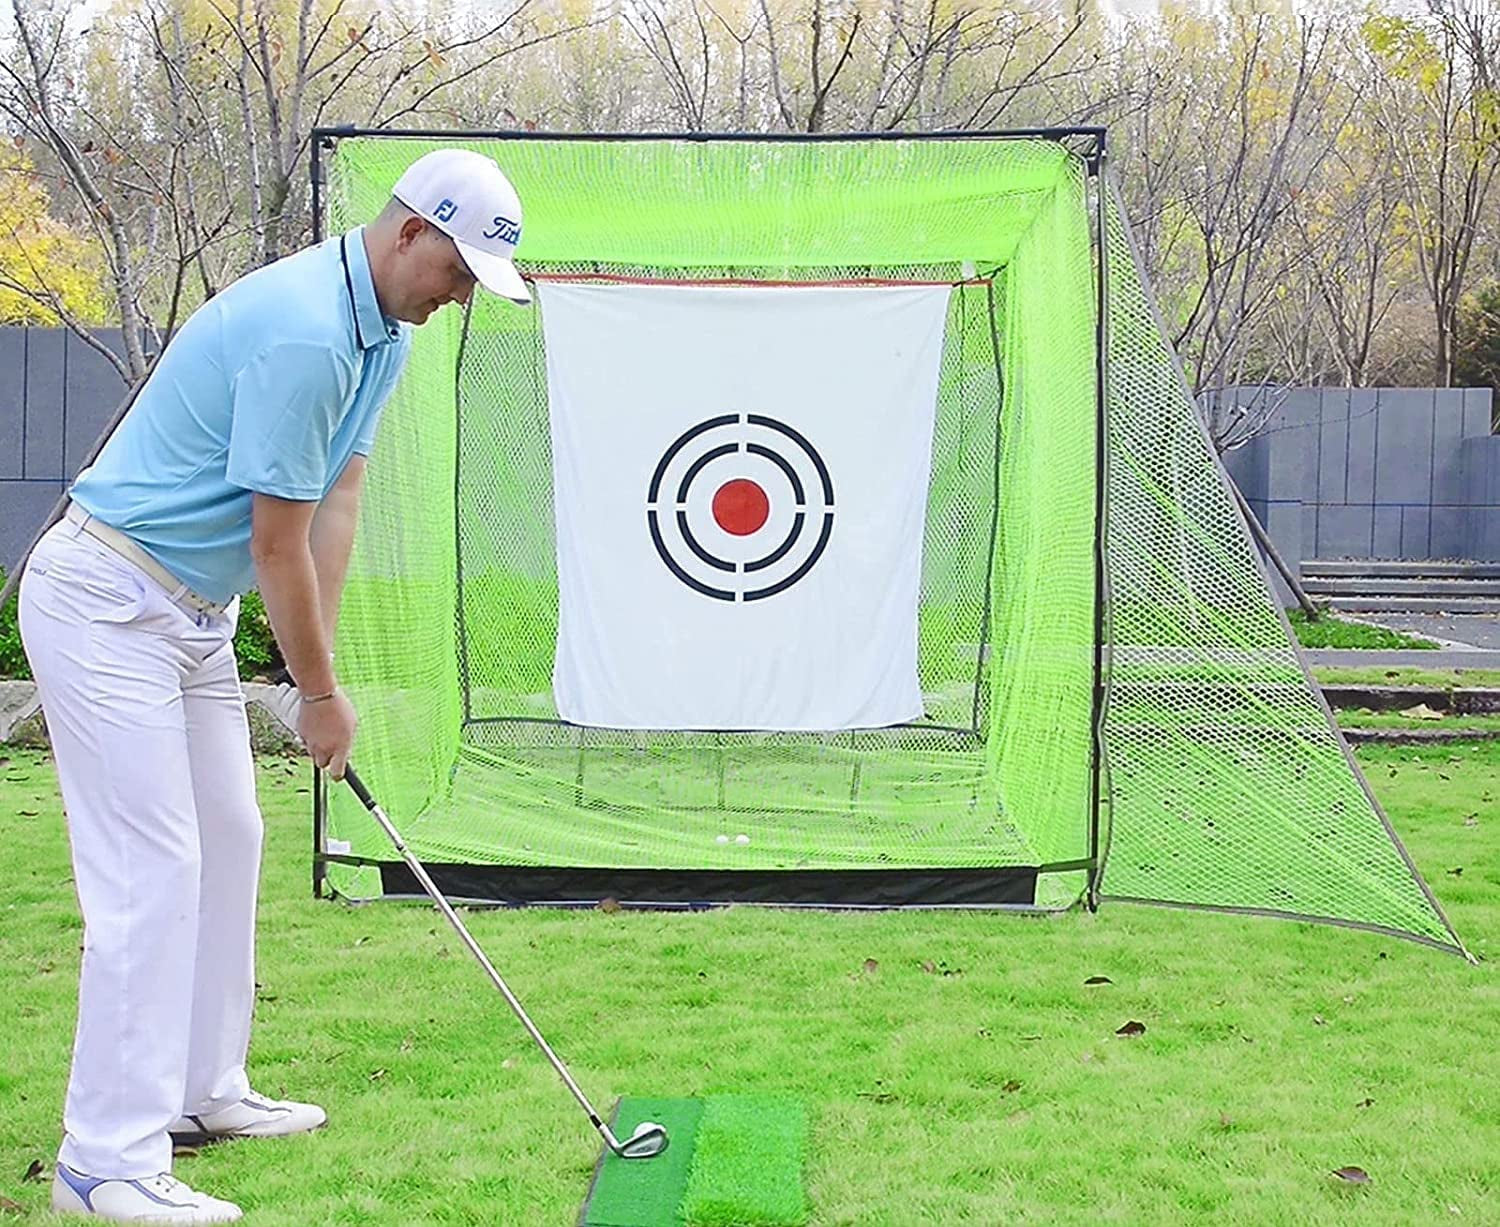 Golf net practice cage, Golf practice nets, Golf batting cage, Practice net, with target